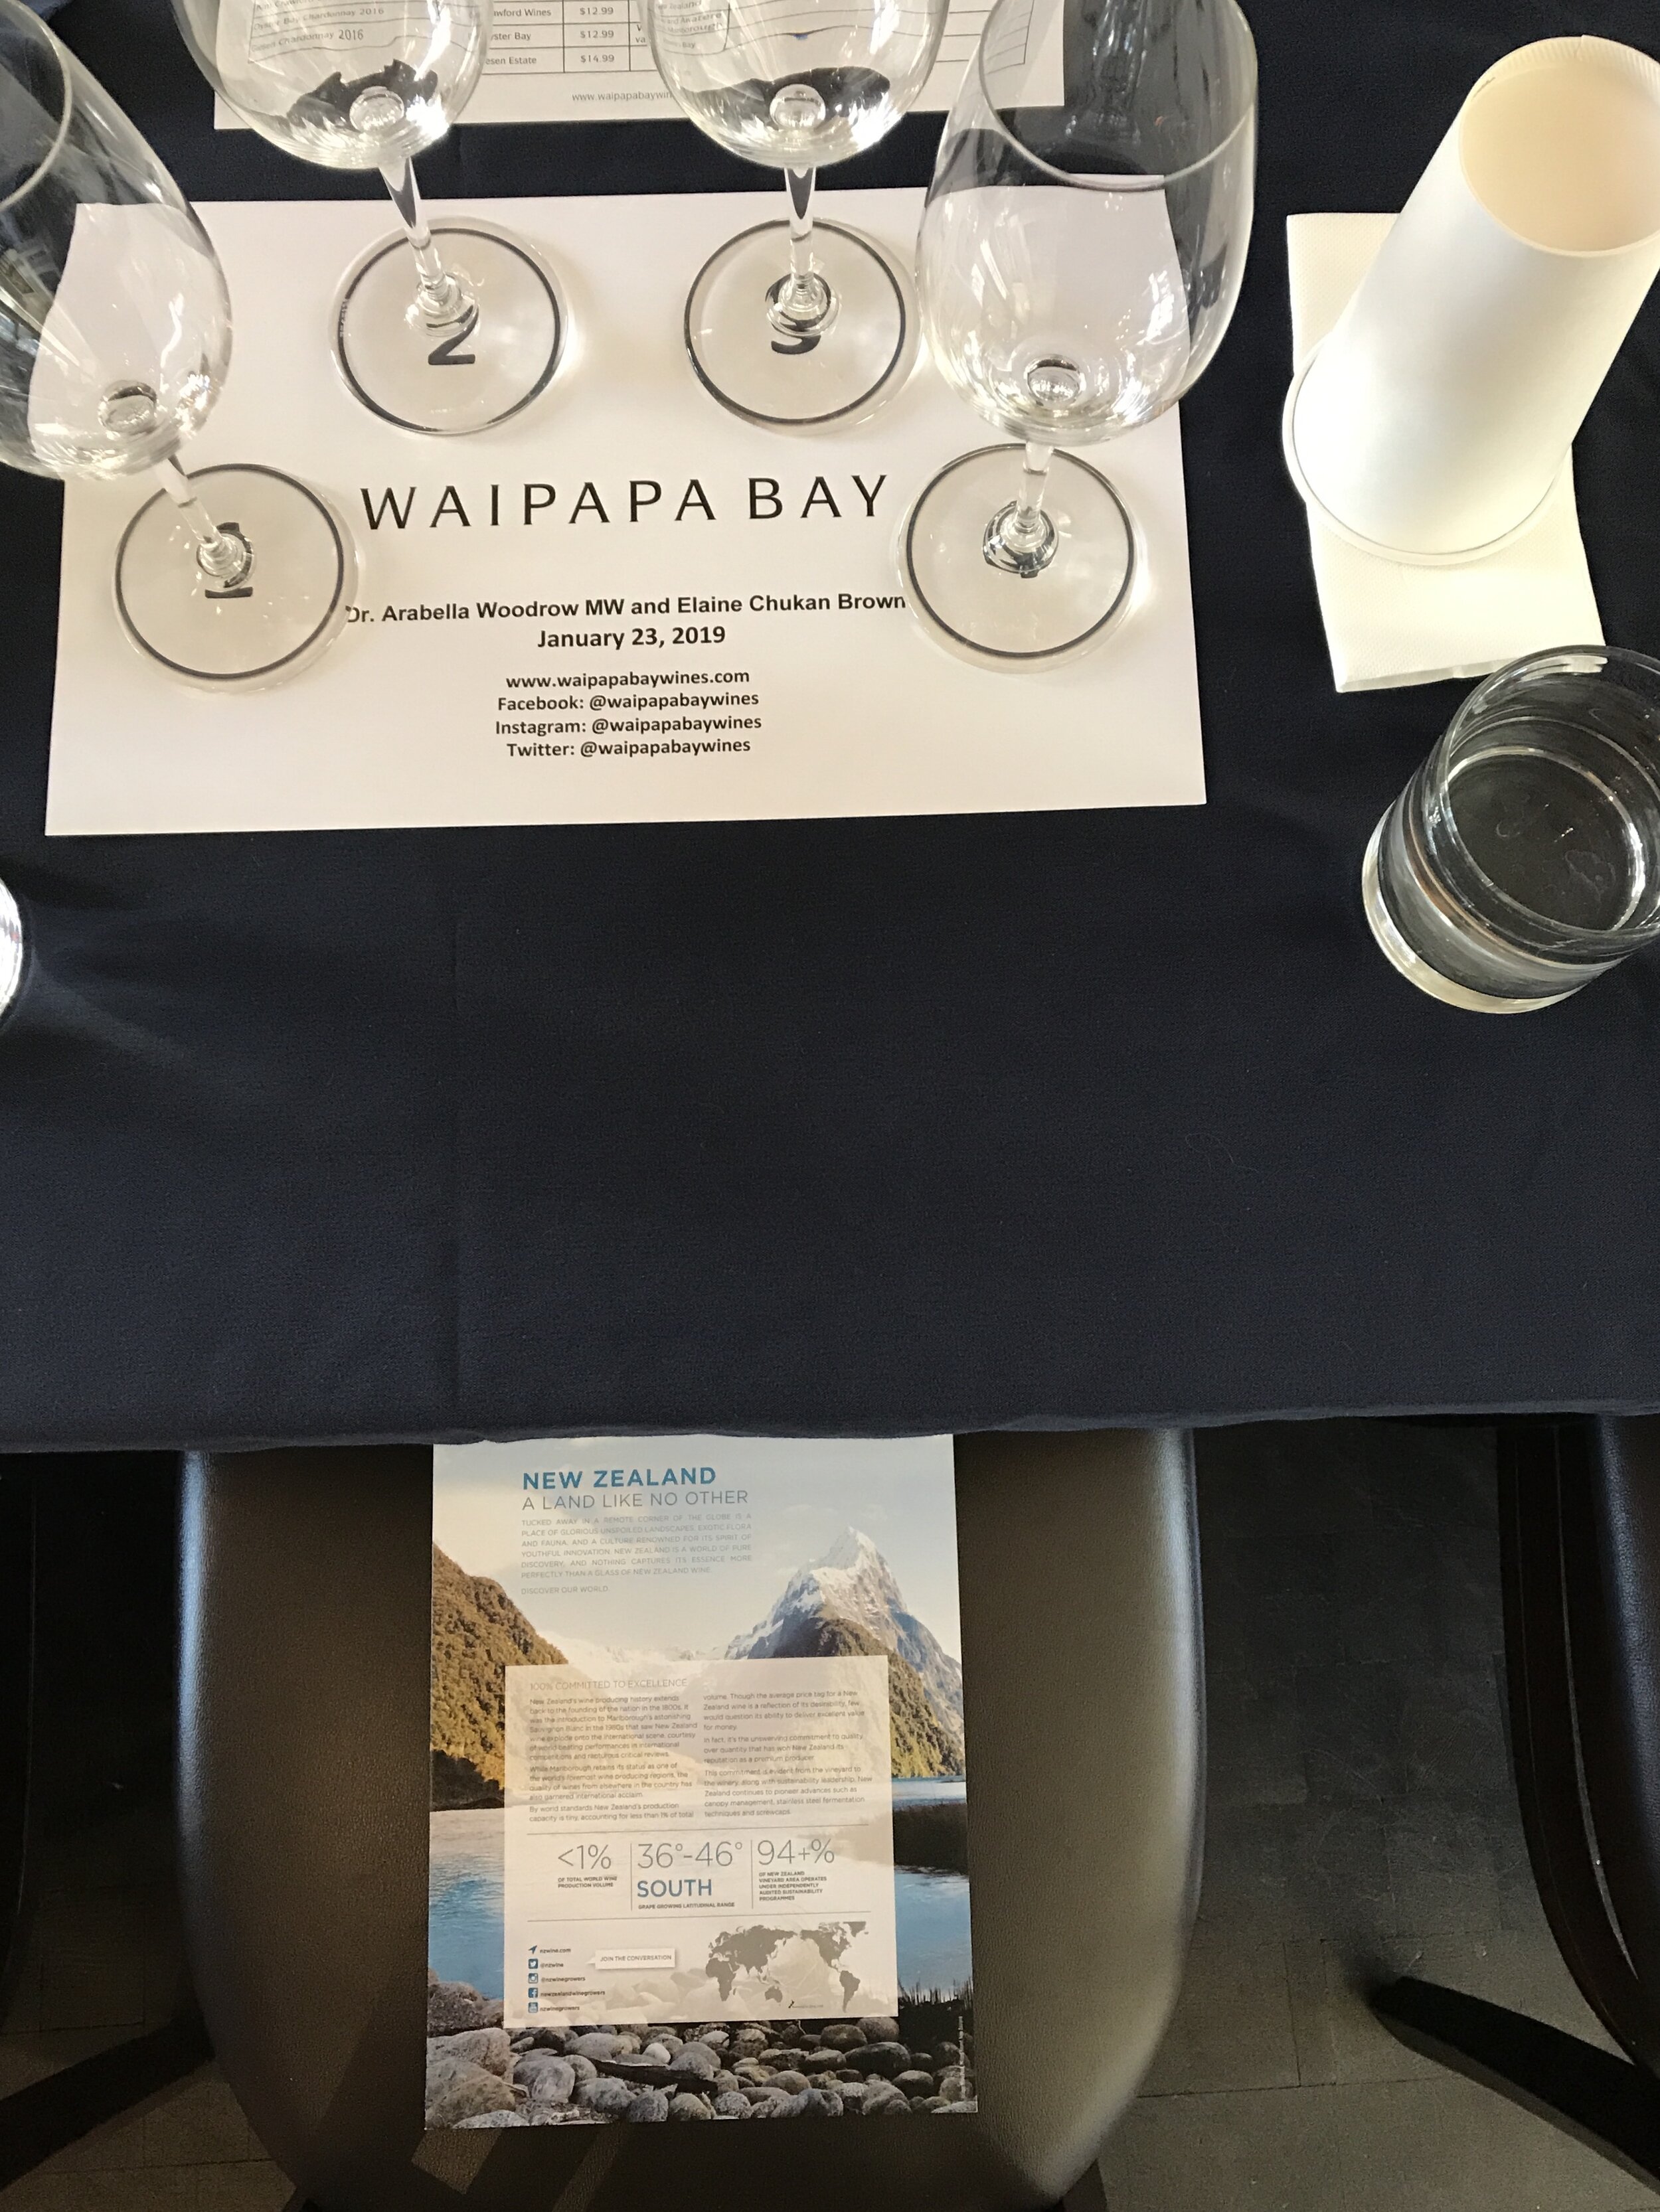    “ODL are fantastically friendly and easy to work with and their great strength is their network and experience within the wine industry. They made great connections for our brands and helped us establish a distinctive brand profile for Waipapa Bay